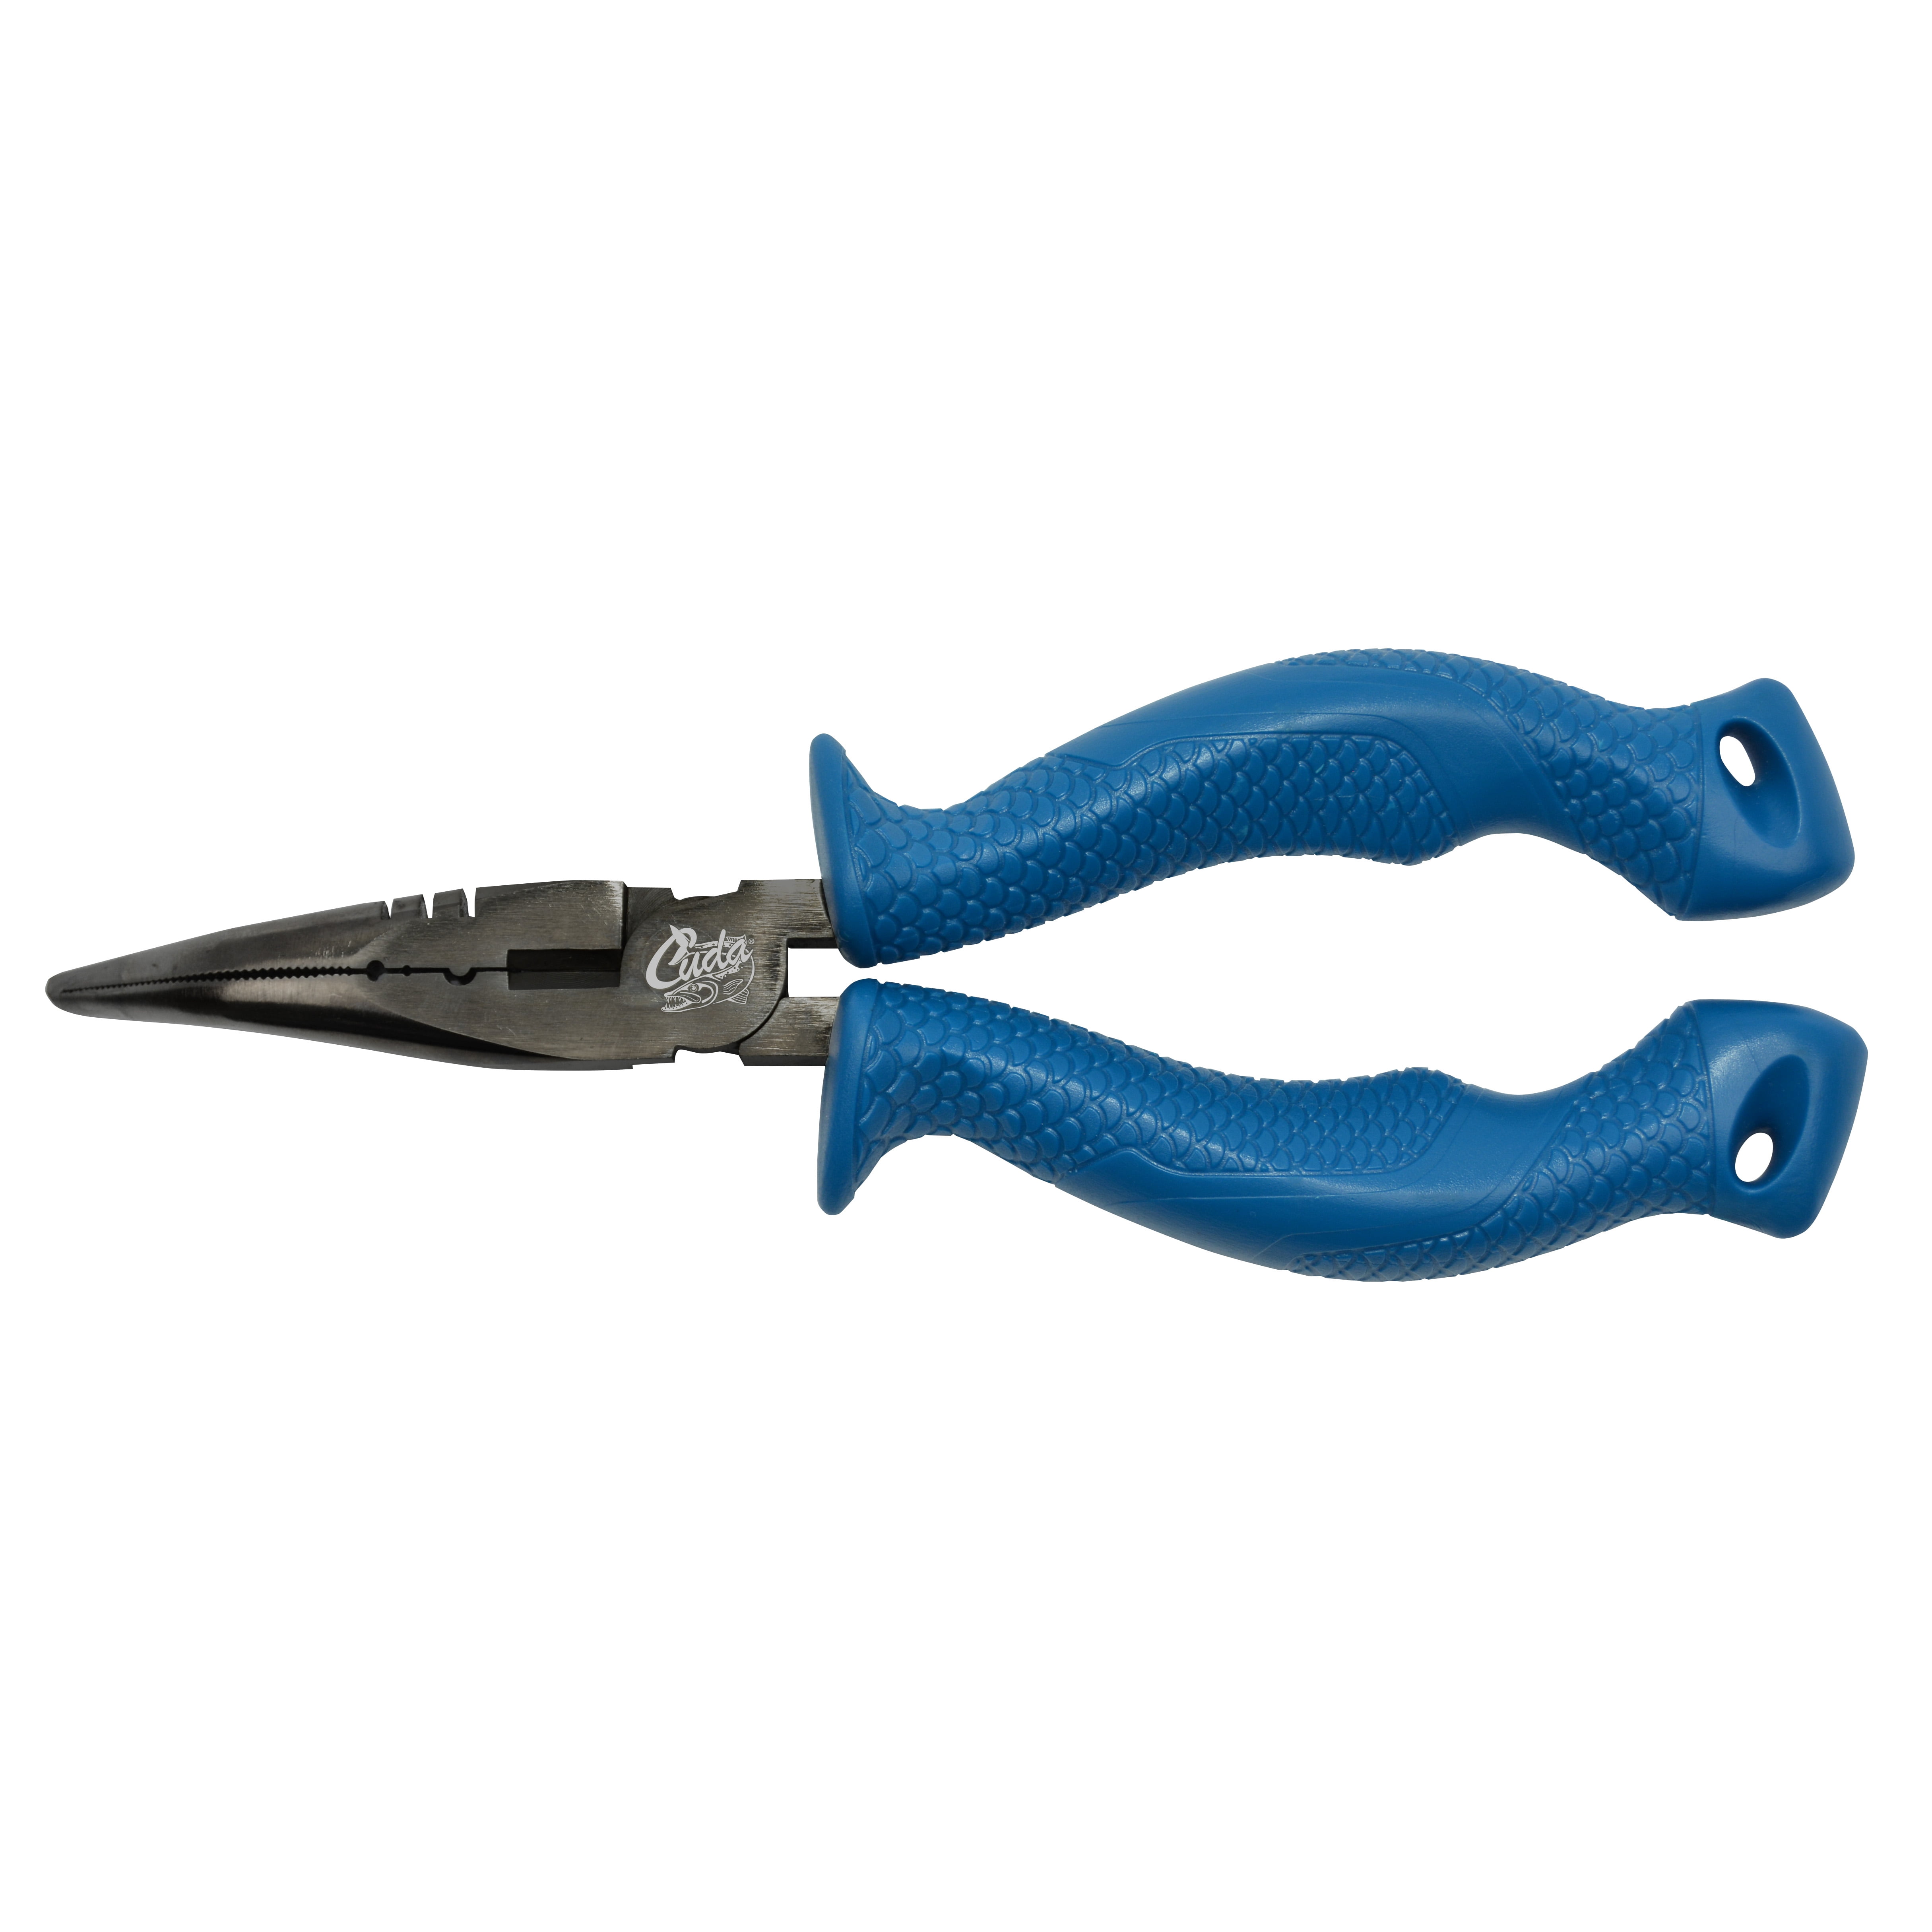  FNODGOING Fishing Pliers 2PCS Curved Nose Scissors Braid Fishing  Line Cutters Split Ring Pliers Fish Hook Remover Braid Wire Cutter Holder  Stainless Steel Multi-Tools Fishing (Blue+Black) : Sports & Outdoors